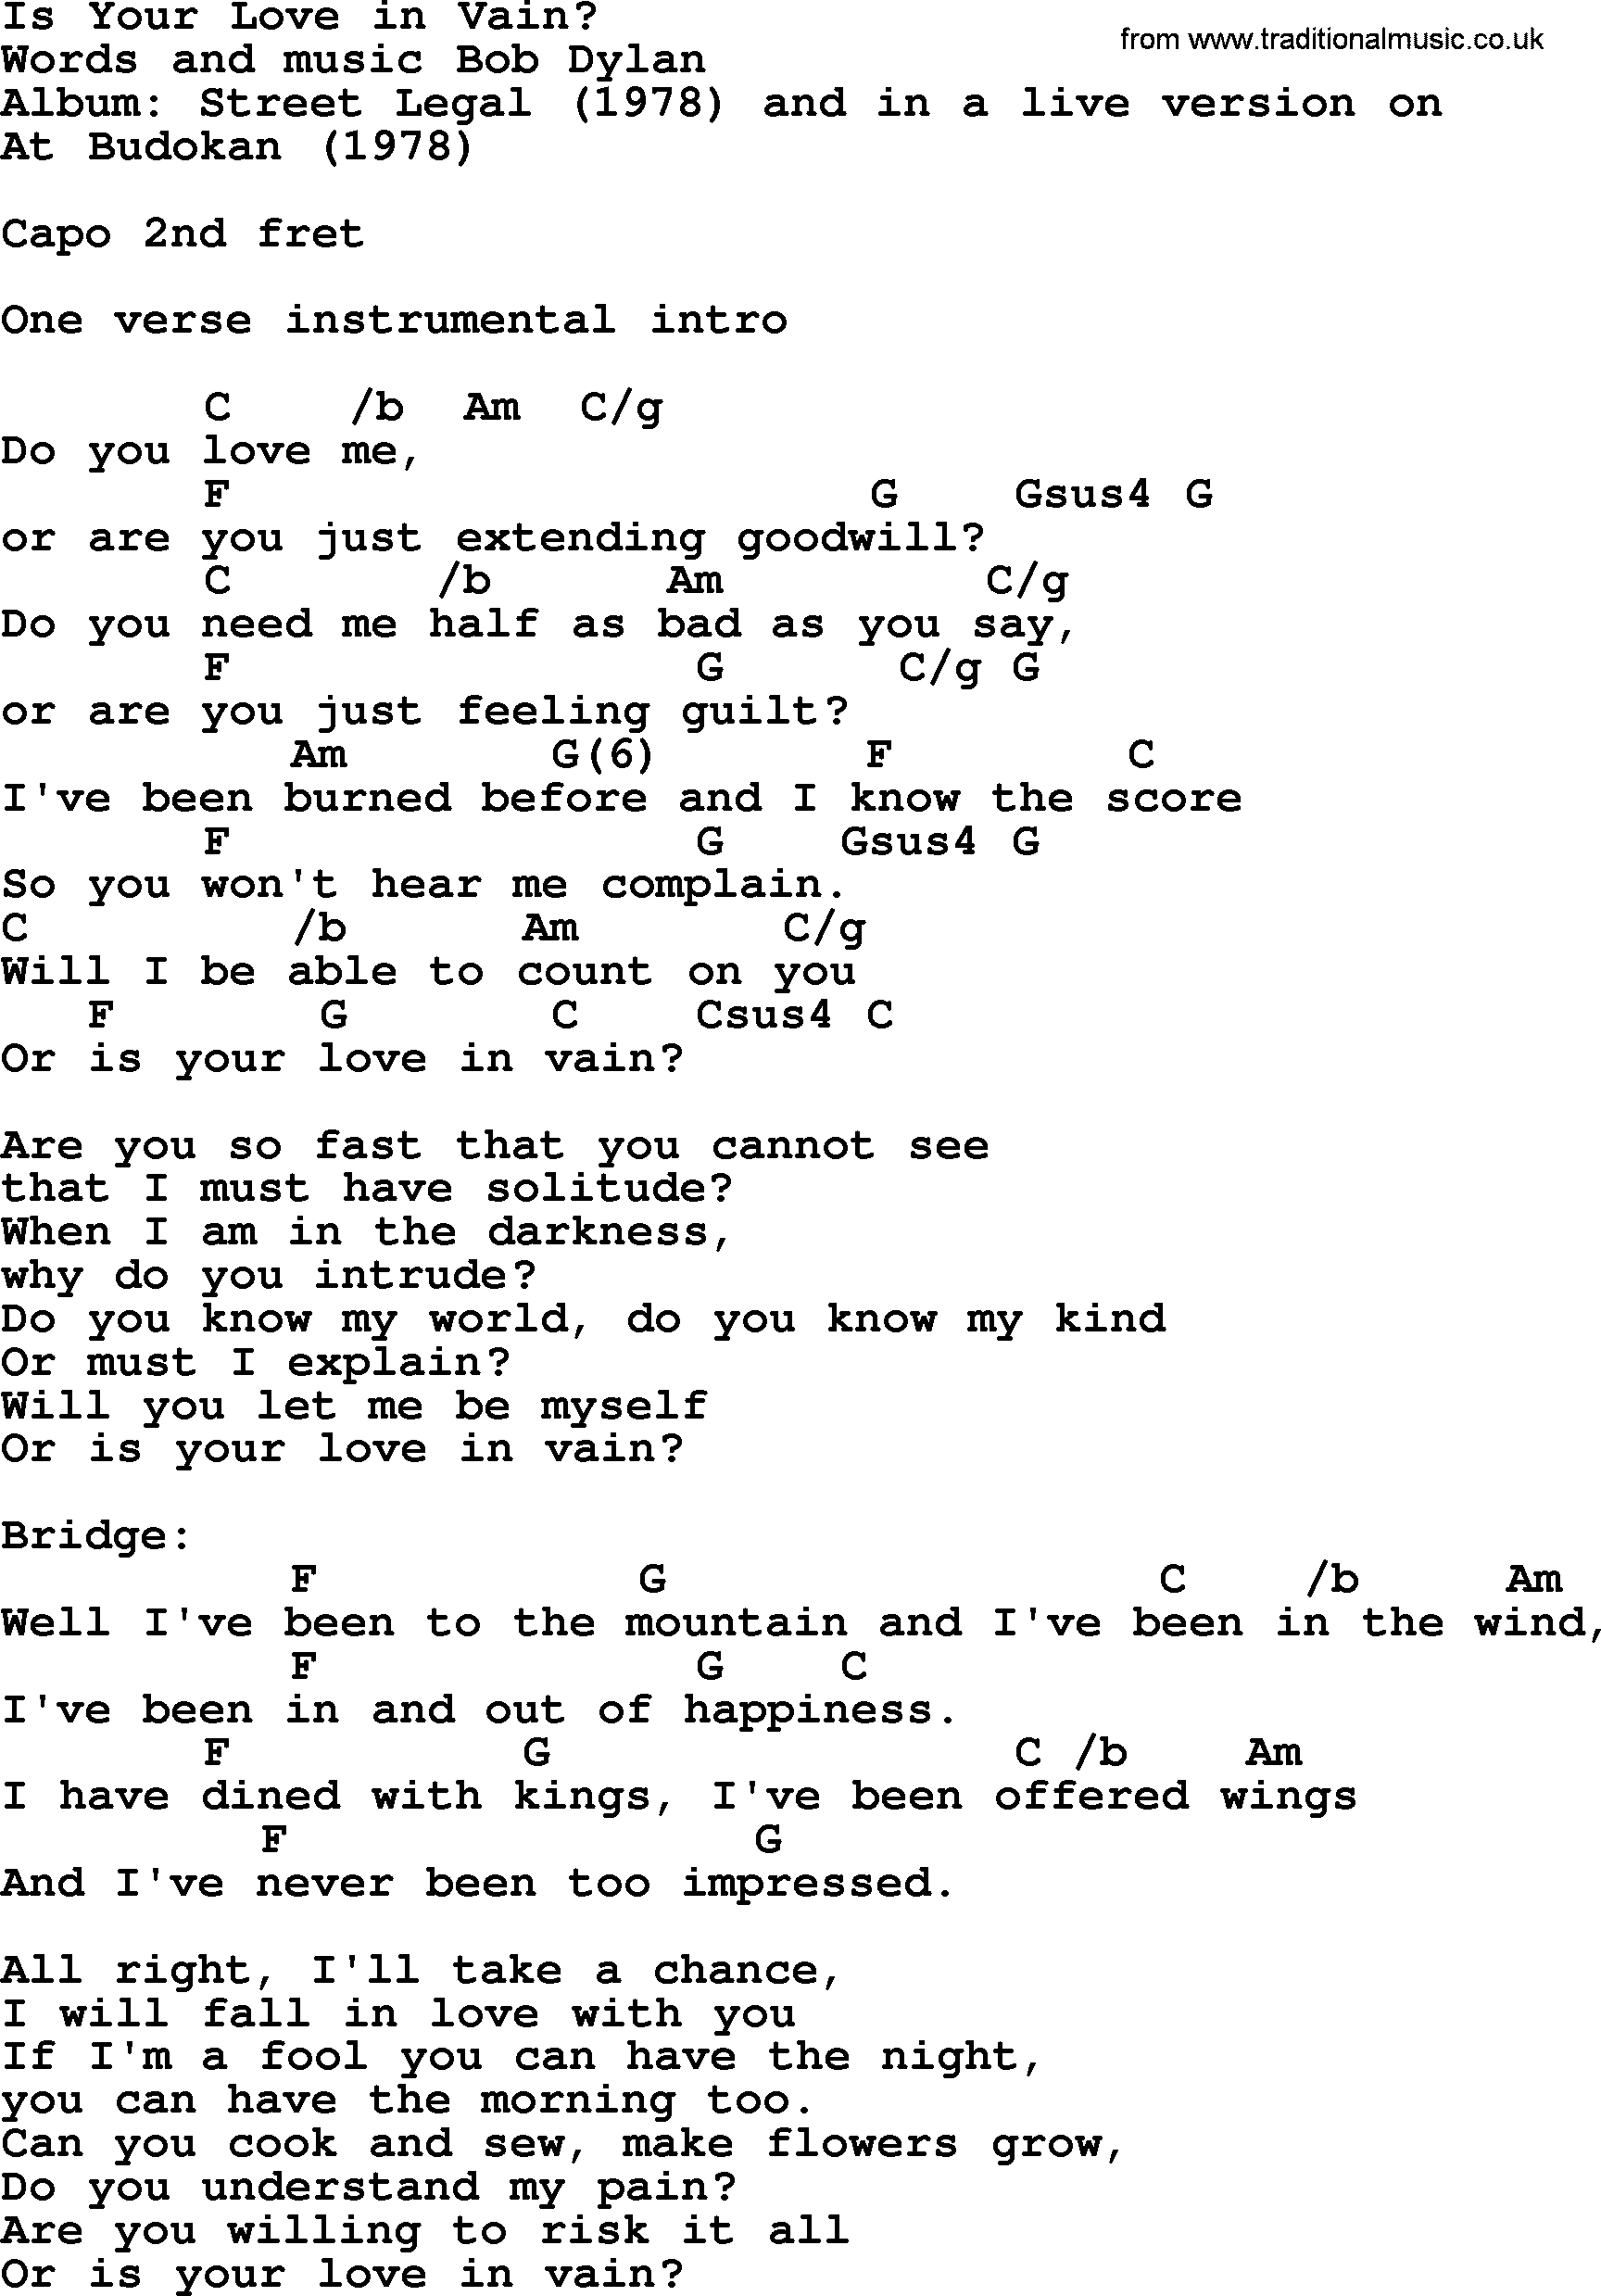 Bob Dylan song, lyrics with chords - Is Your Love in Vain